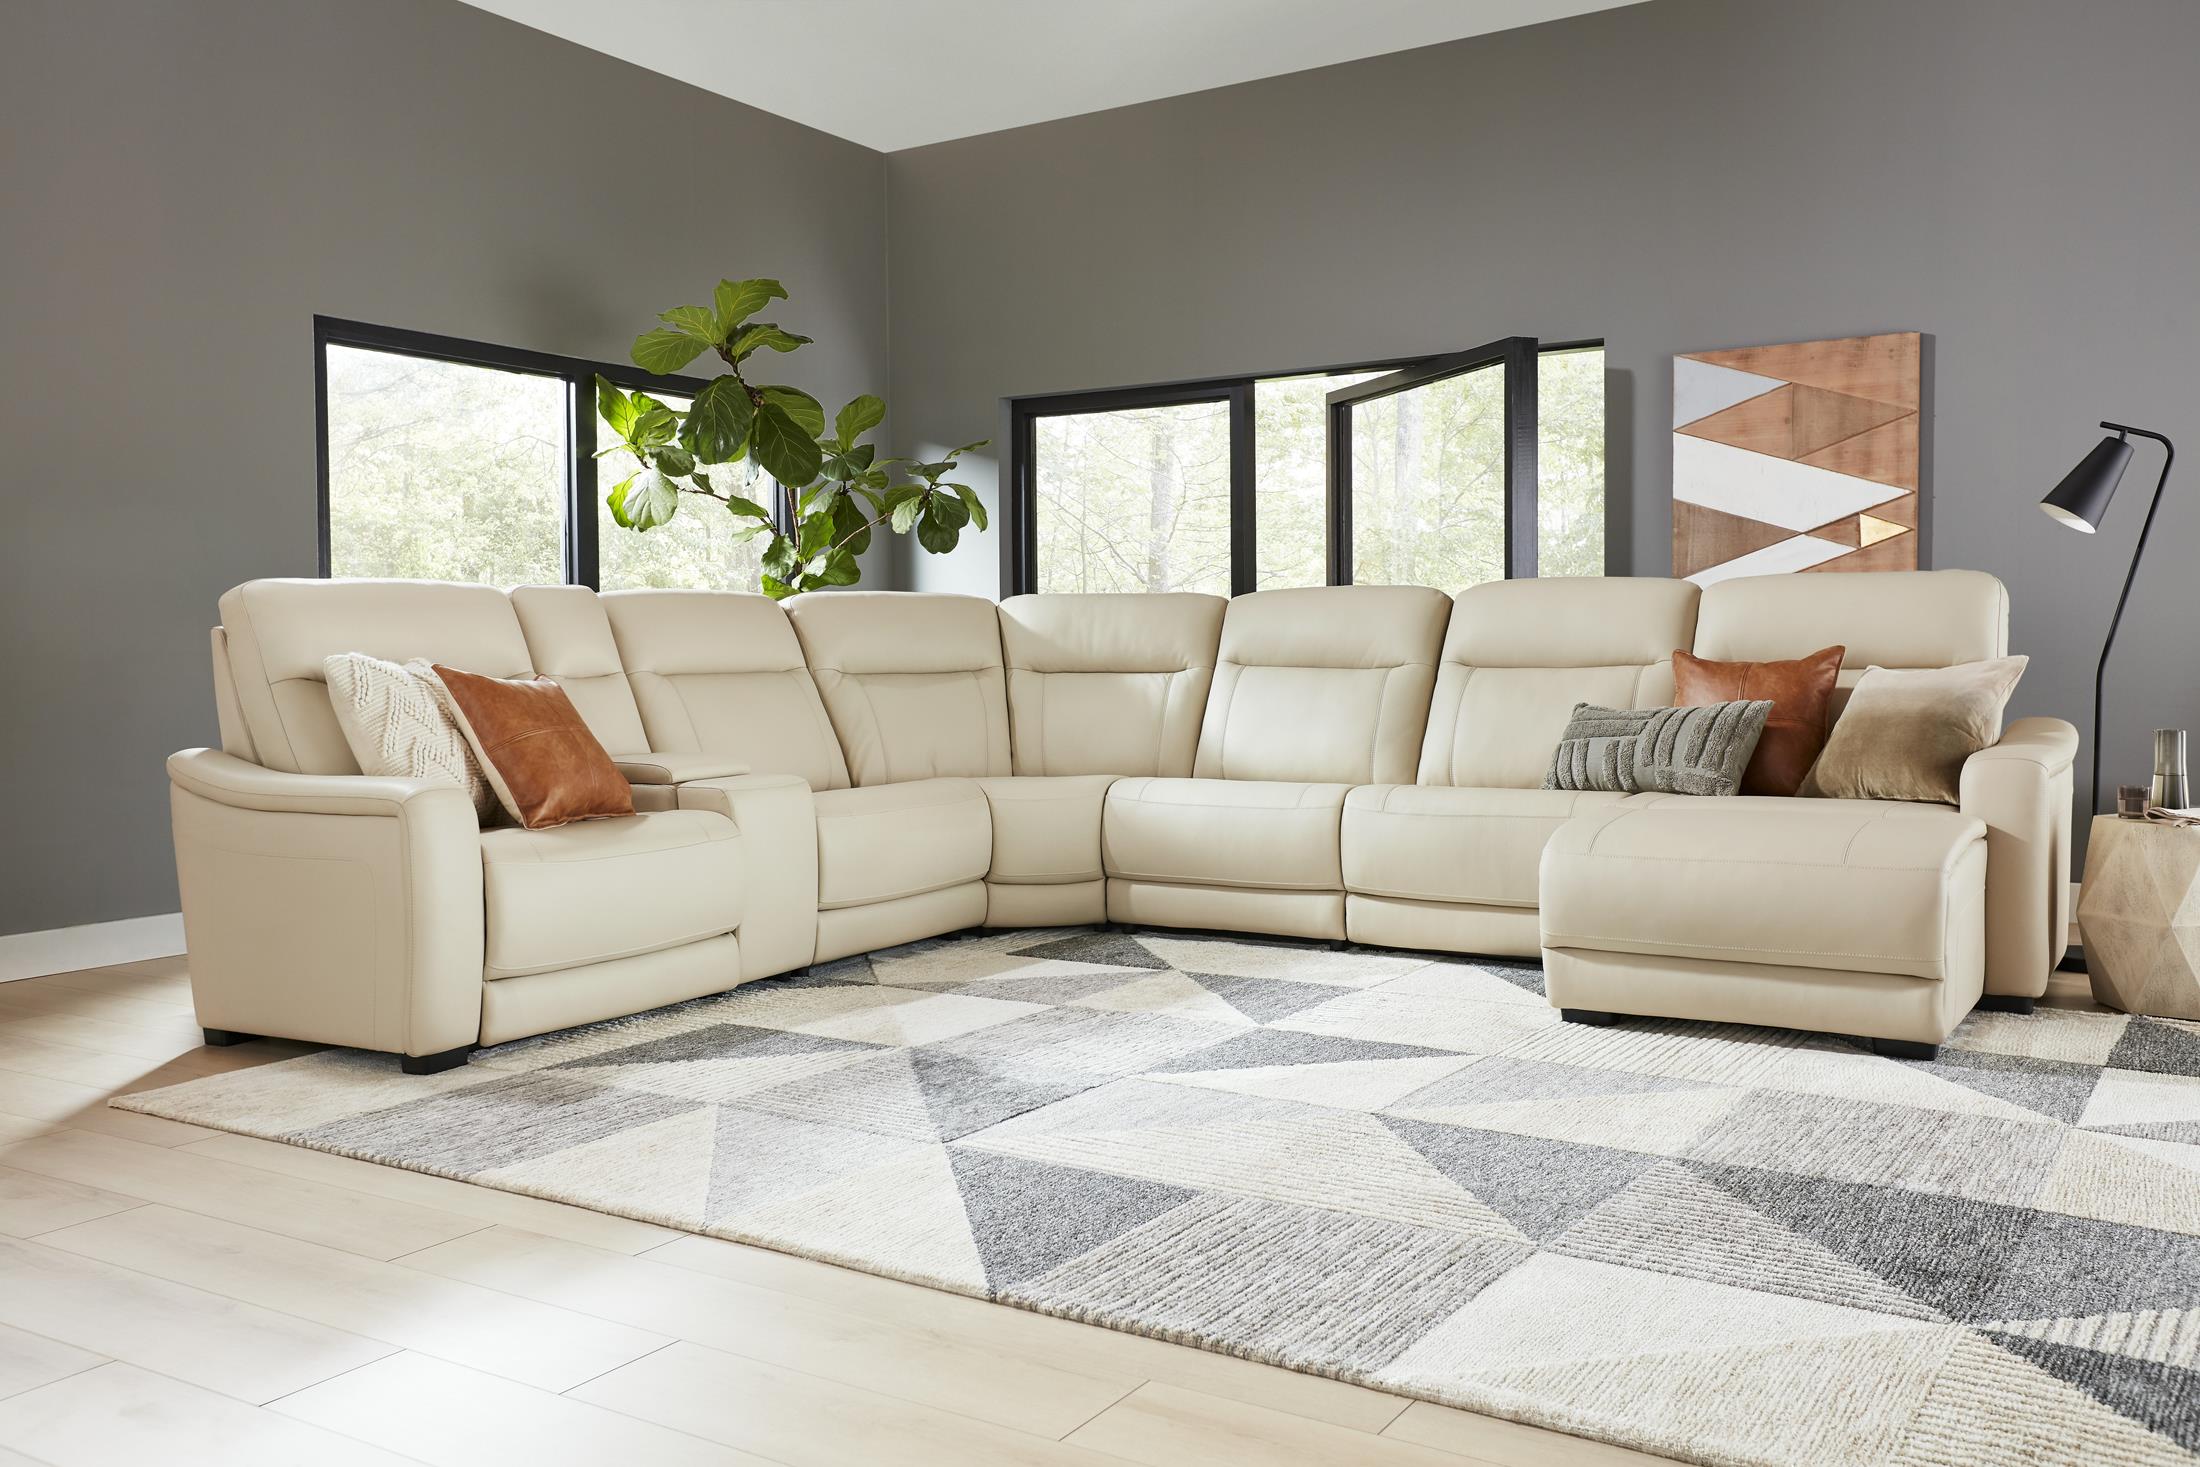 Newport 6-Piece Almond Leather Power Reclining Sectional with Chaise